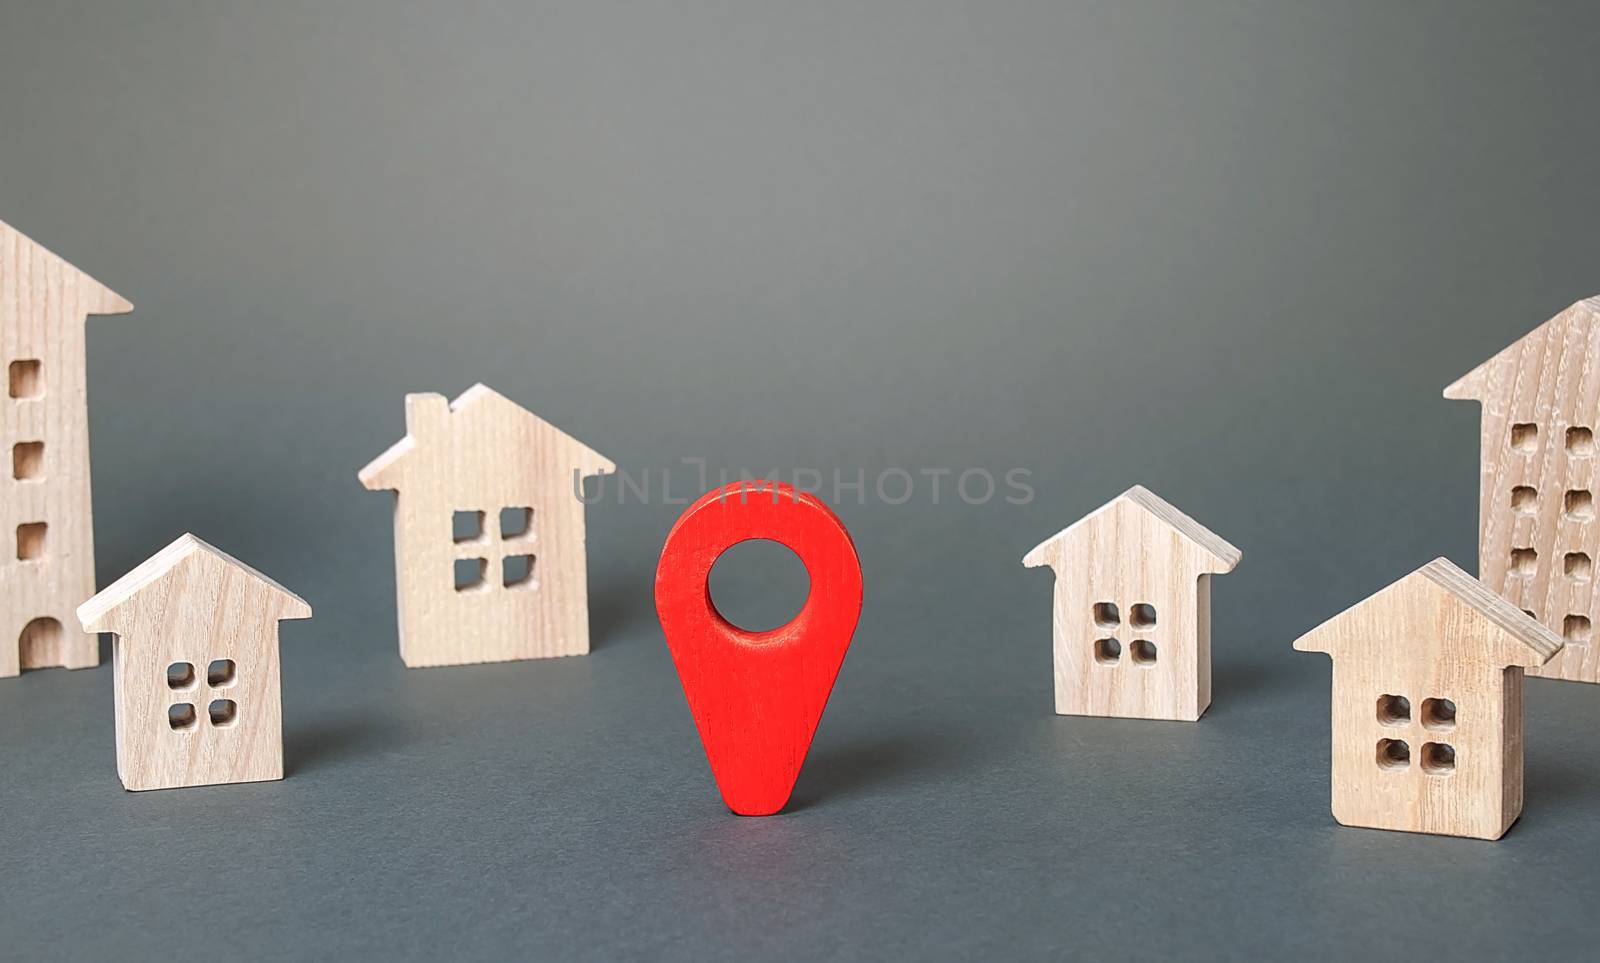 Red navigation pointer in a city town. Places and sights. Location routes. Travel, choosing a new place options of residence. Holidays, festivals events. Assessment of infrastructure and environment.